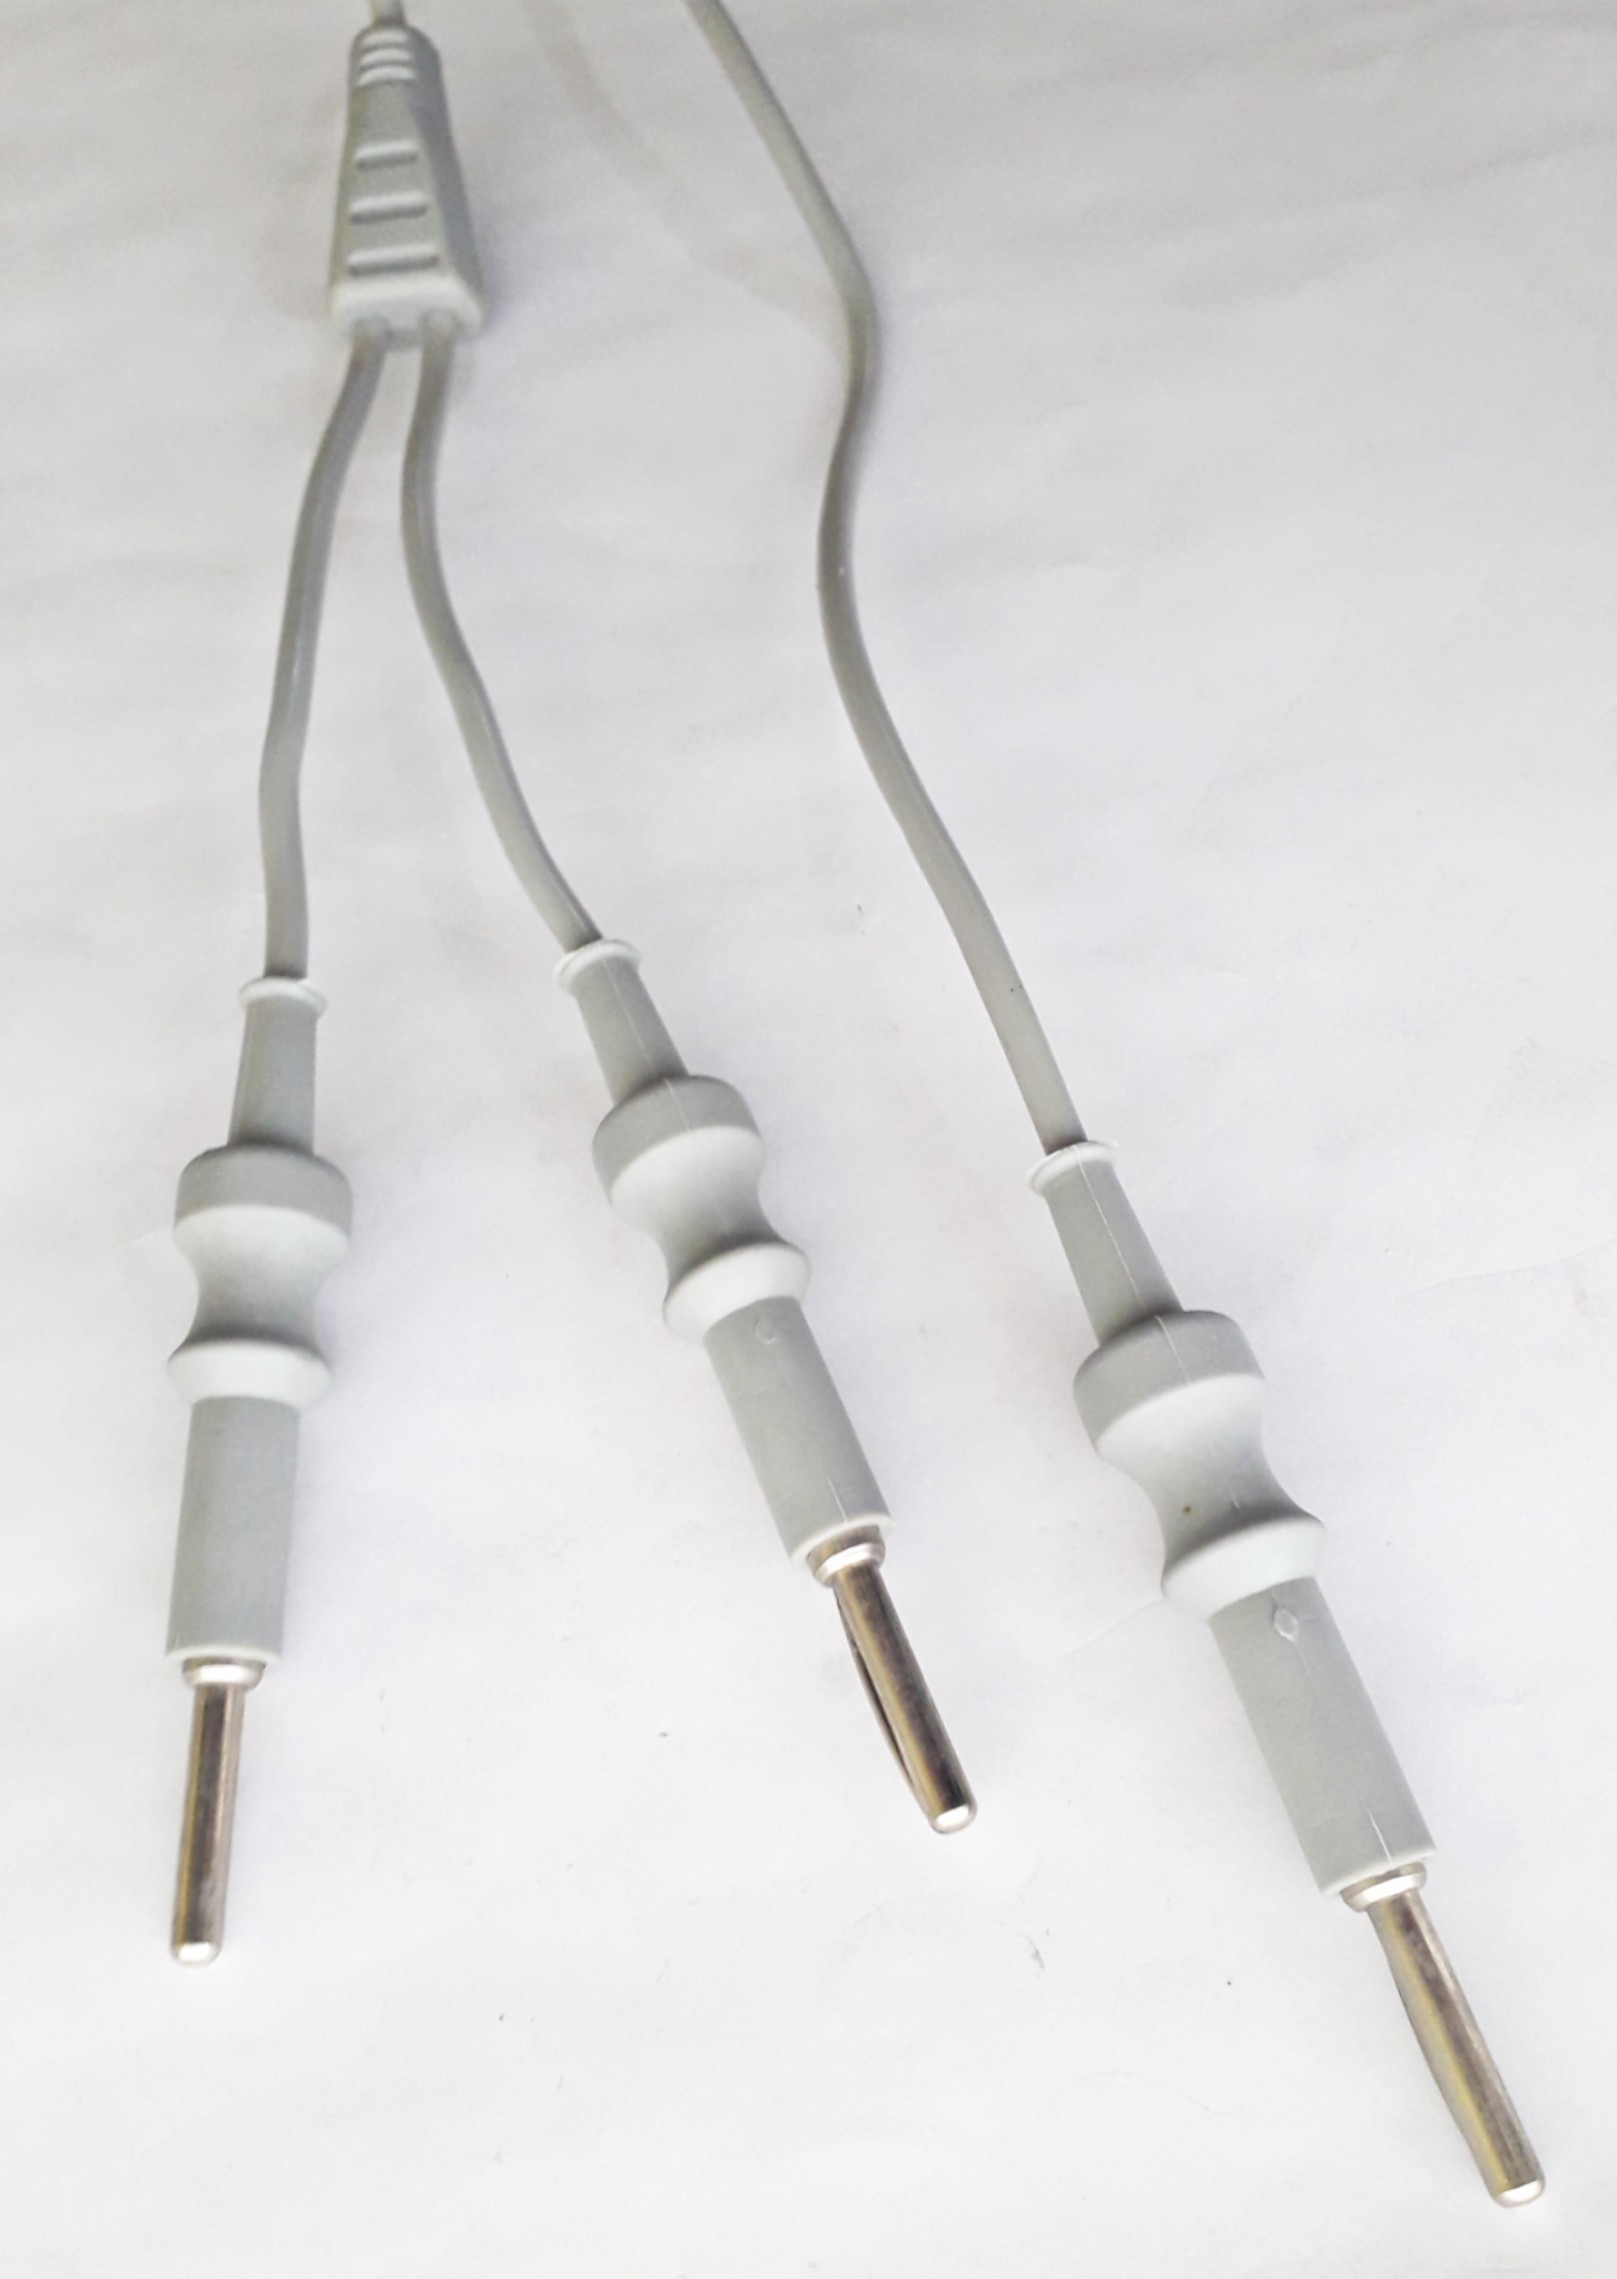 Single Pin To 2 Pin Patient Plate Cable Cord